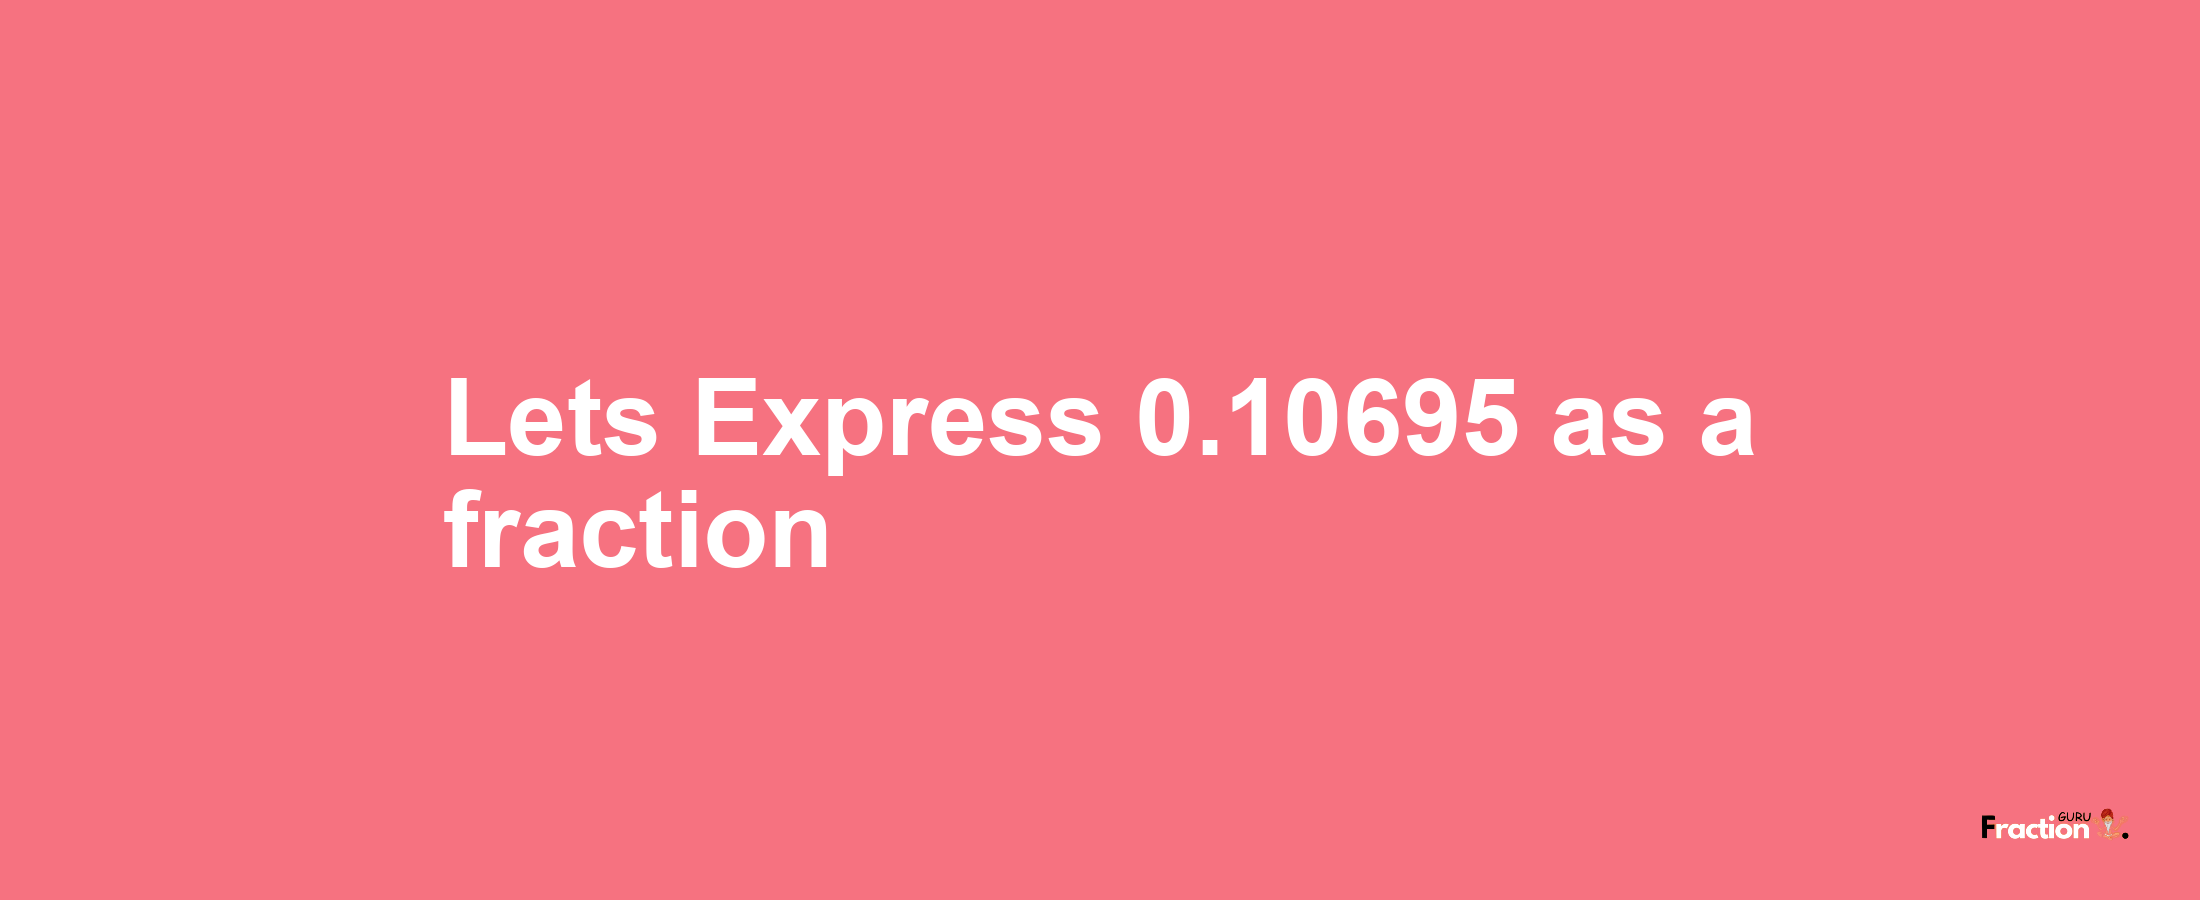 Lets Express 0.10695 as afraction